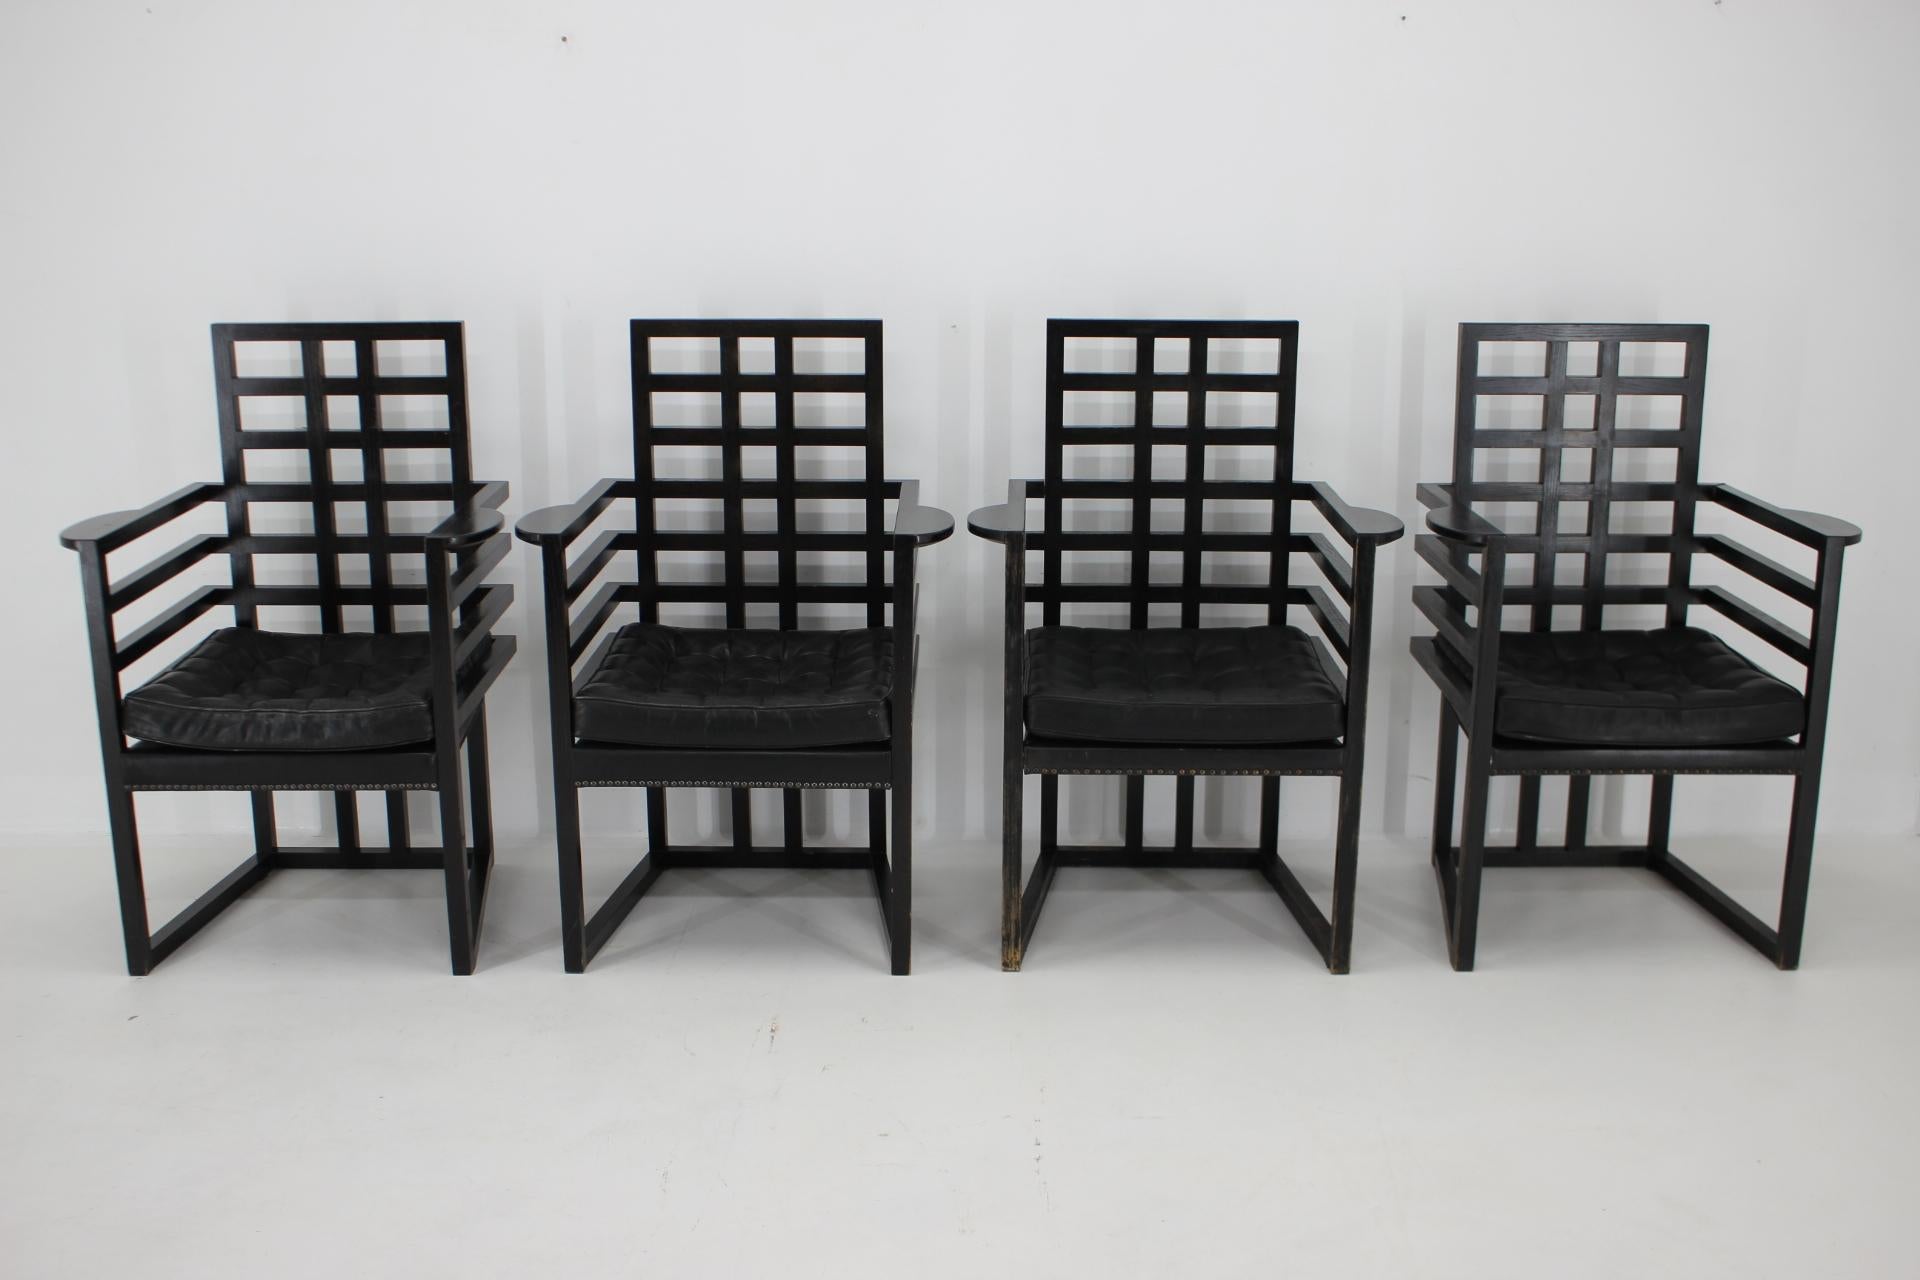 - Chairs designed by Josef Hoffmann and made by Wittmann of Austria
- Originally designed in 1908, these examples are from the latter part of the 20th century. 
- Ebonized ash frames with button
- tufted black leather cushions.